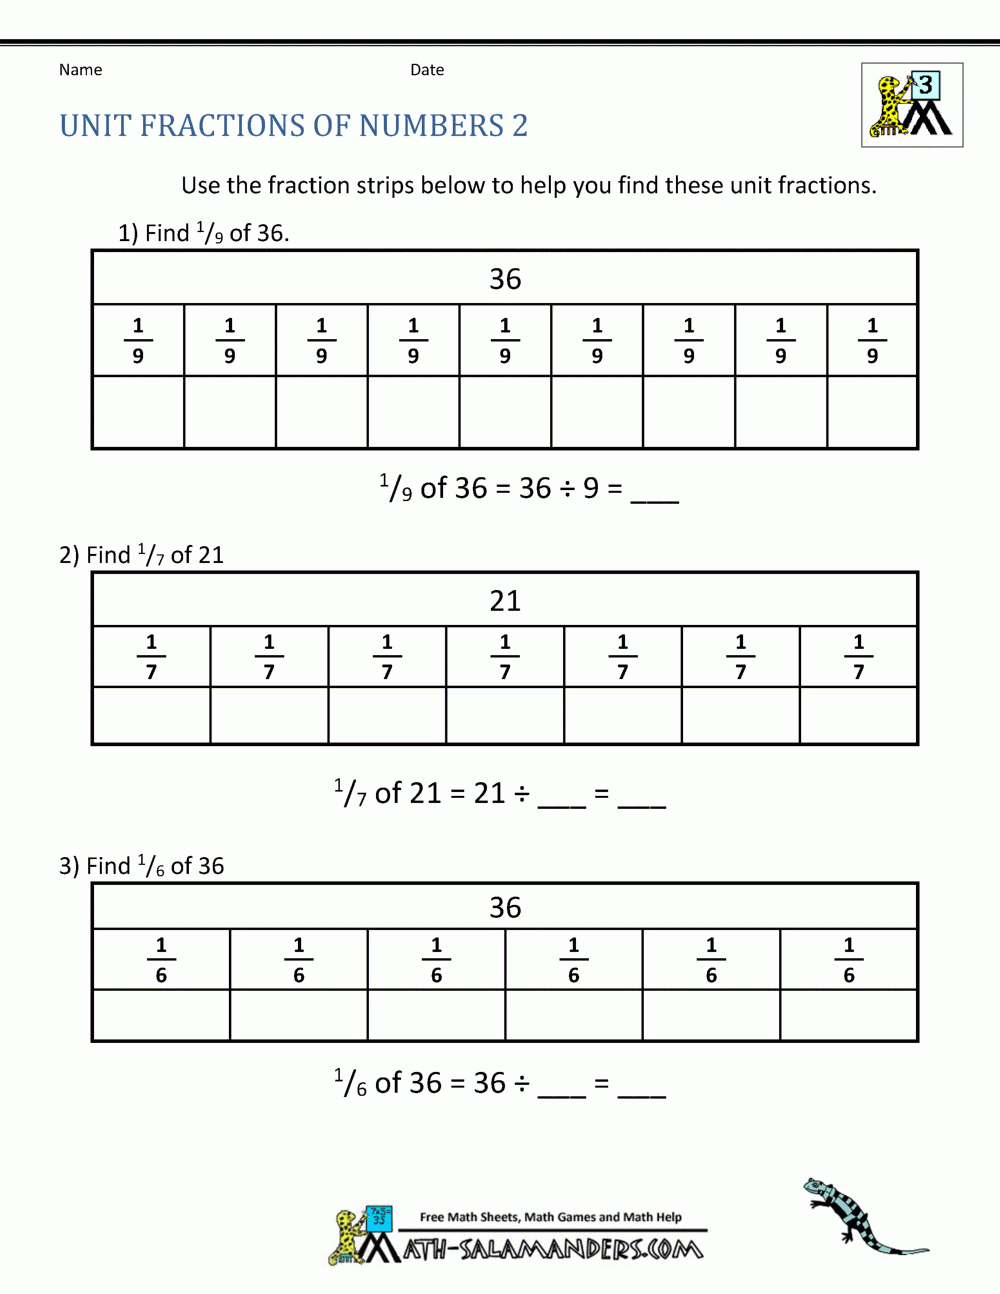 fractions-types-of-fractions-examples-solutions